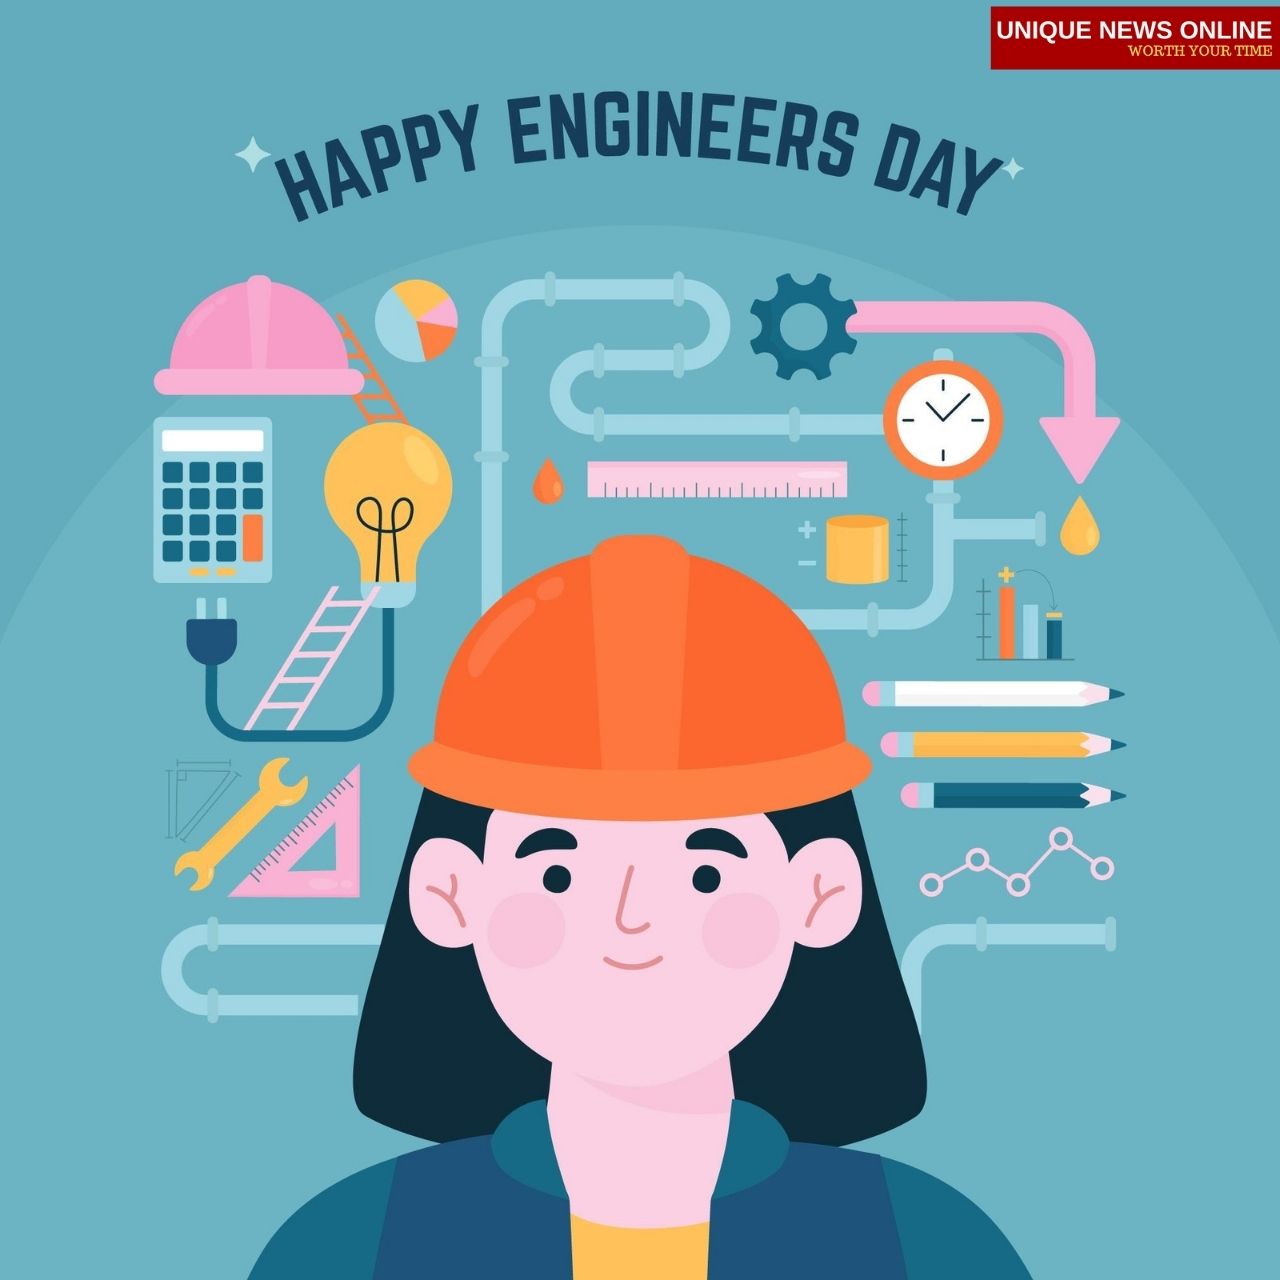 Engineer's Day 2021 Quotes, Wishes, Images, Messages, and greetings for Husband